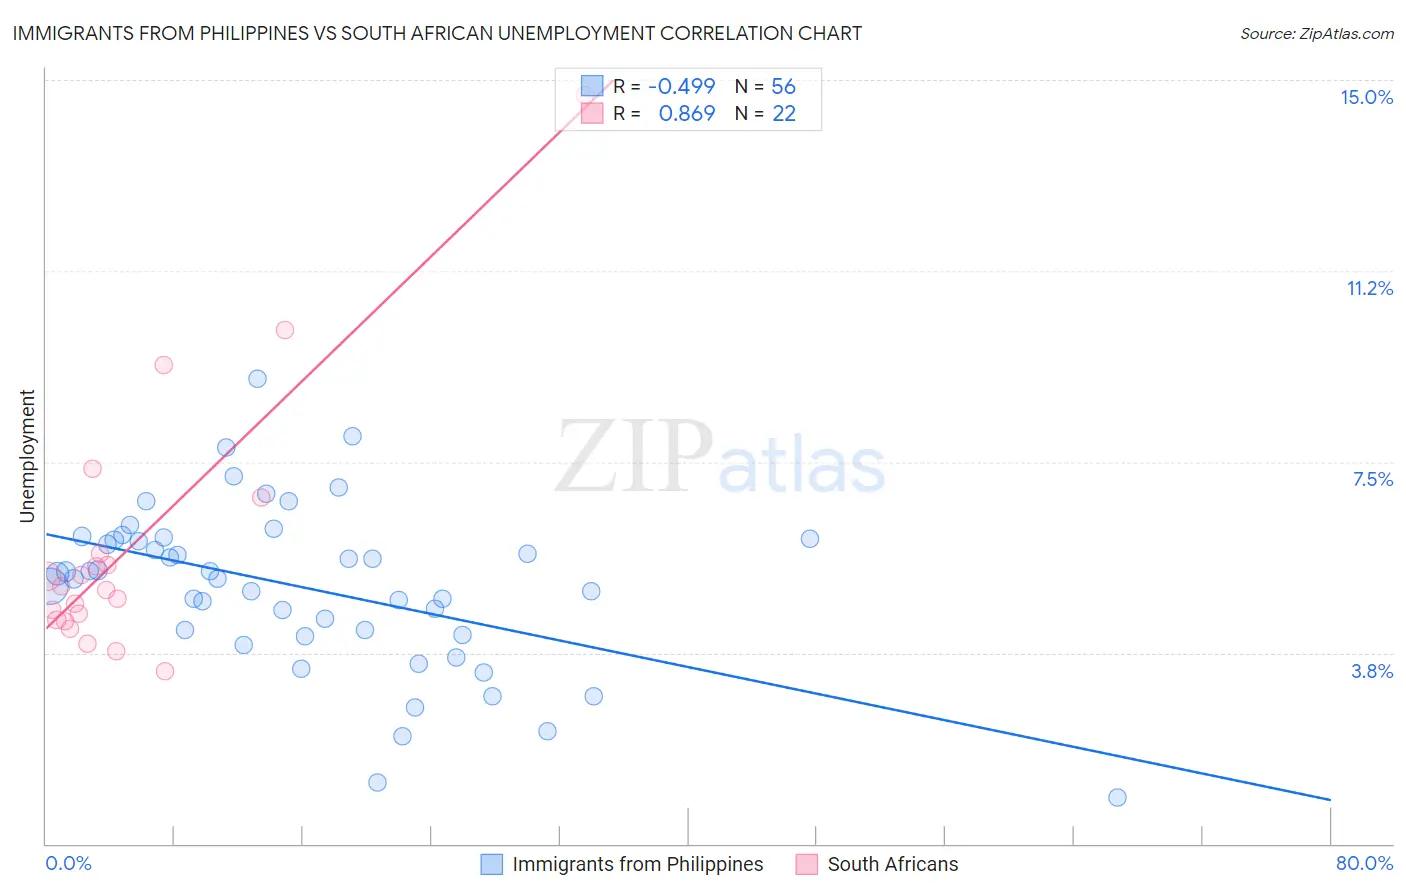 Immigrants from Philippines vs South African Unemployment